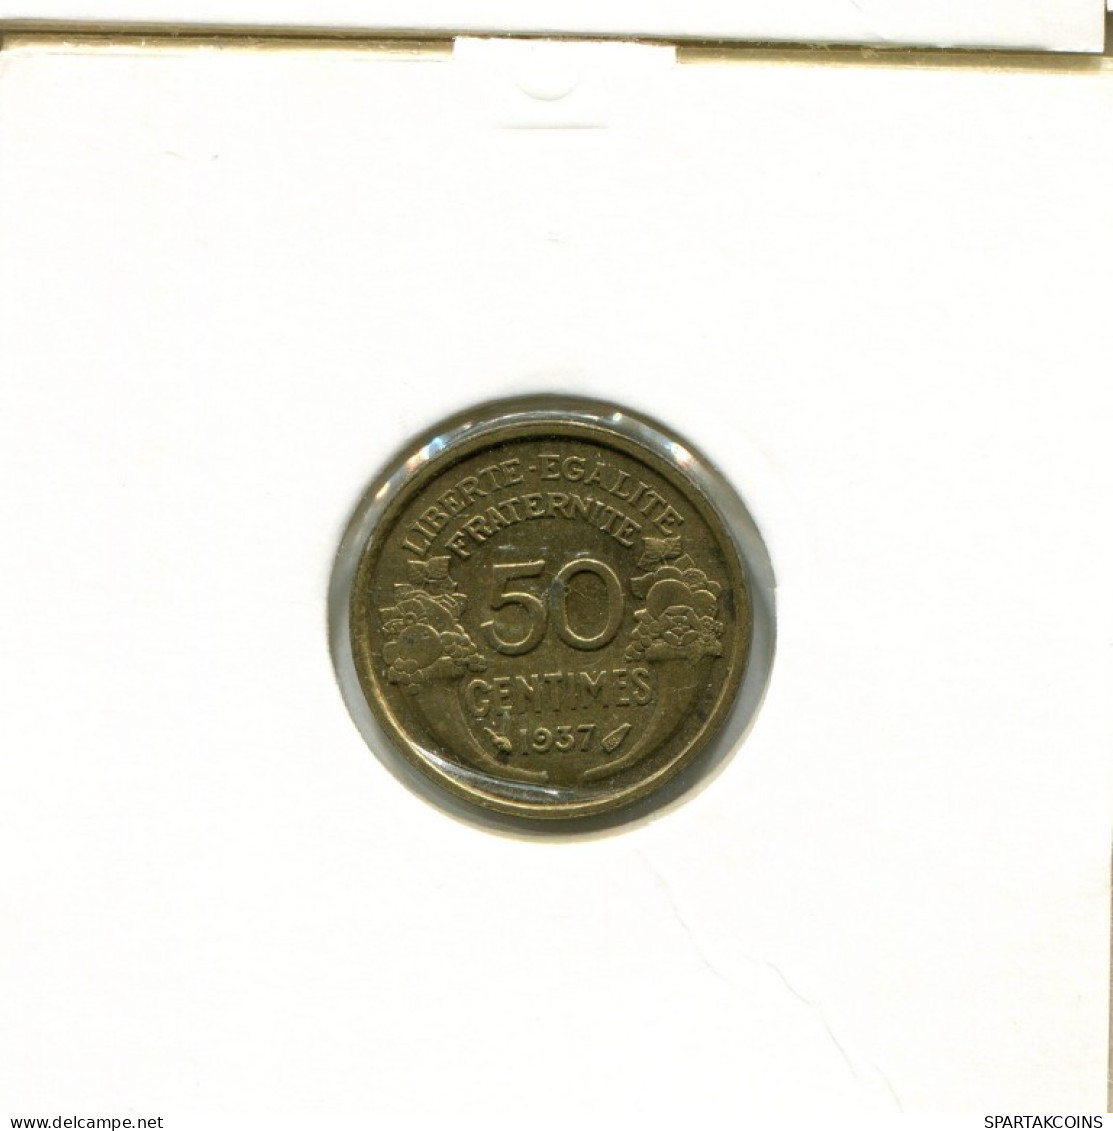 50 CENTIMES 1937 FRANCE French Coin #AK926.U.A - 50 Centimes